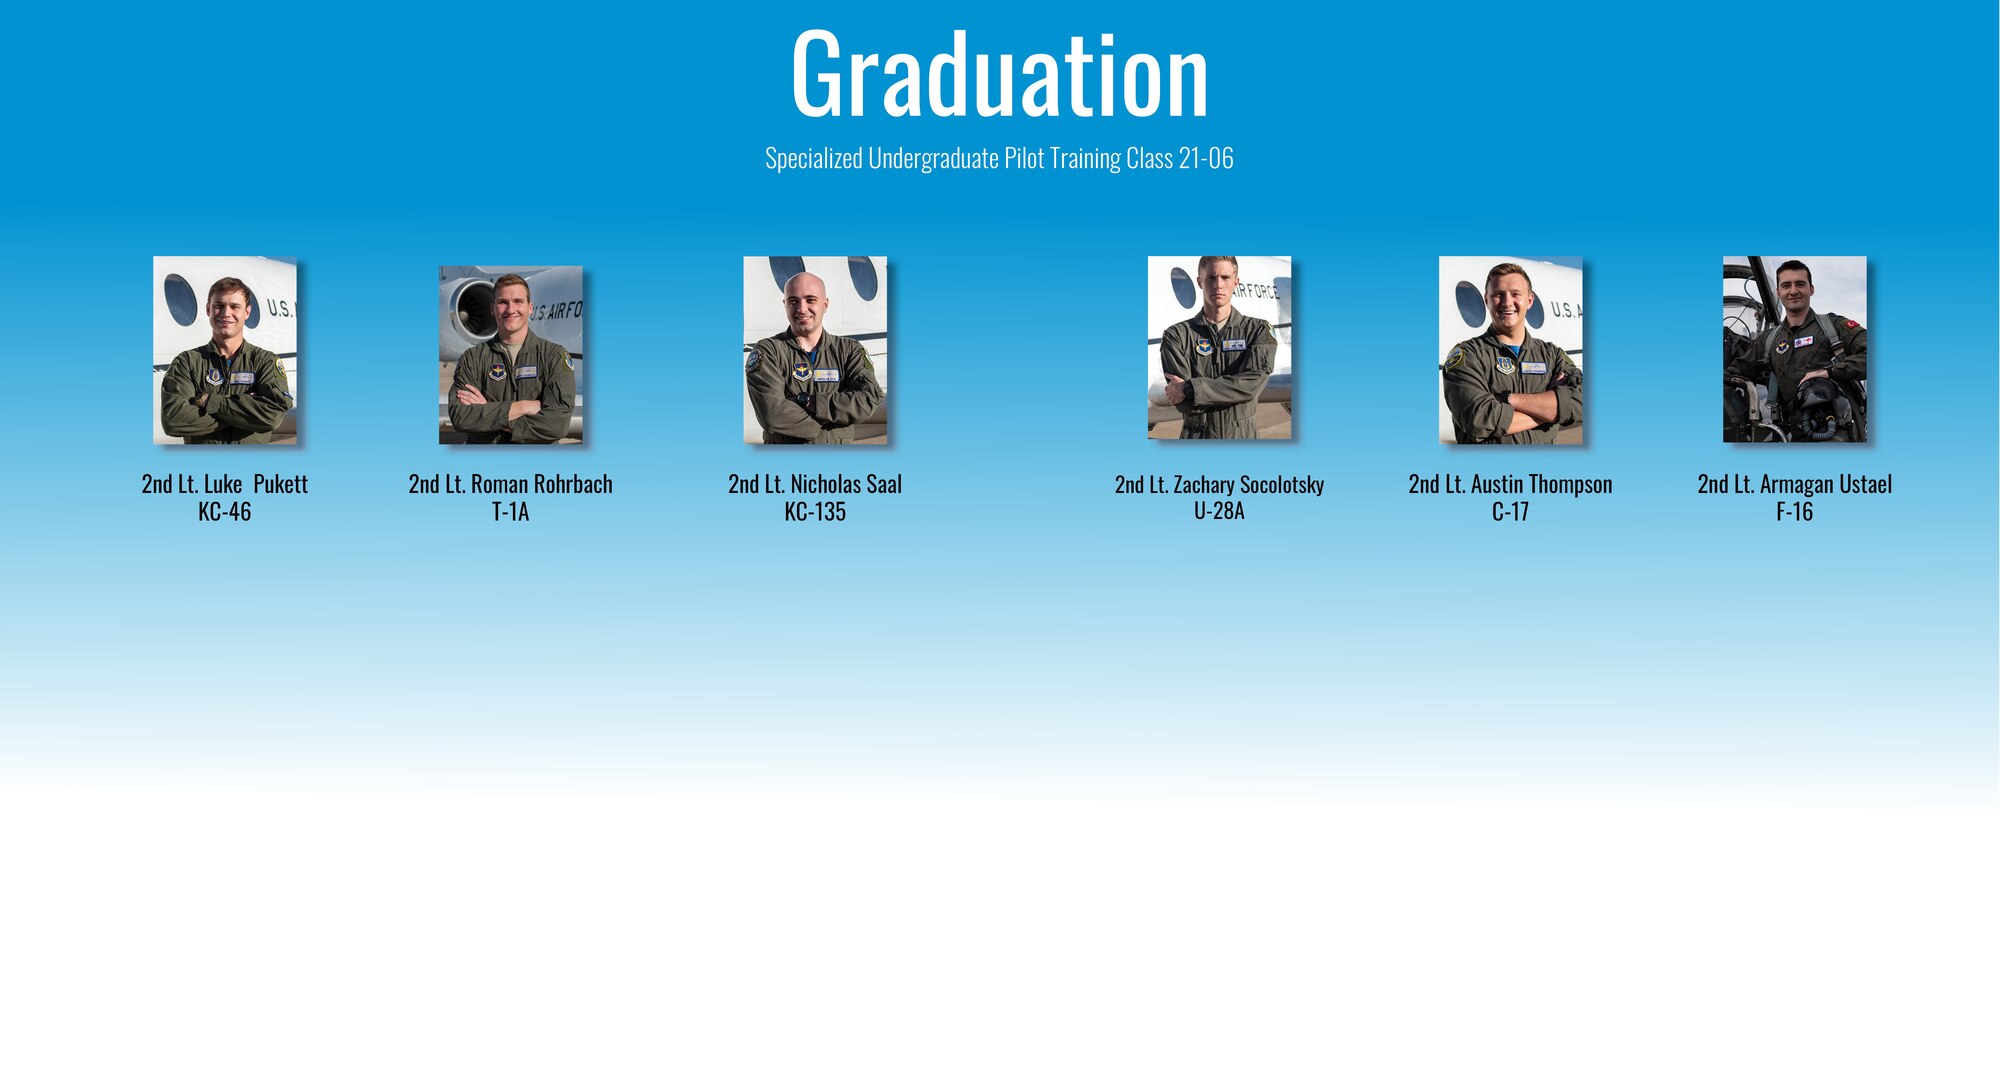 Specialized Undergraduate Pilot Training class 21-06 graduated after 52 weeks of training at Laughlin Air Force Base, Texas, Feb. 26, 2021. Laughlin is home of the 47th Flying Training Wing, whose mission is to build combat-ready Airmen, leaders and pilots. (U.S. Air Force graphic by Senior Airman Anne McCready)